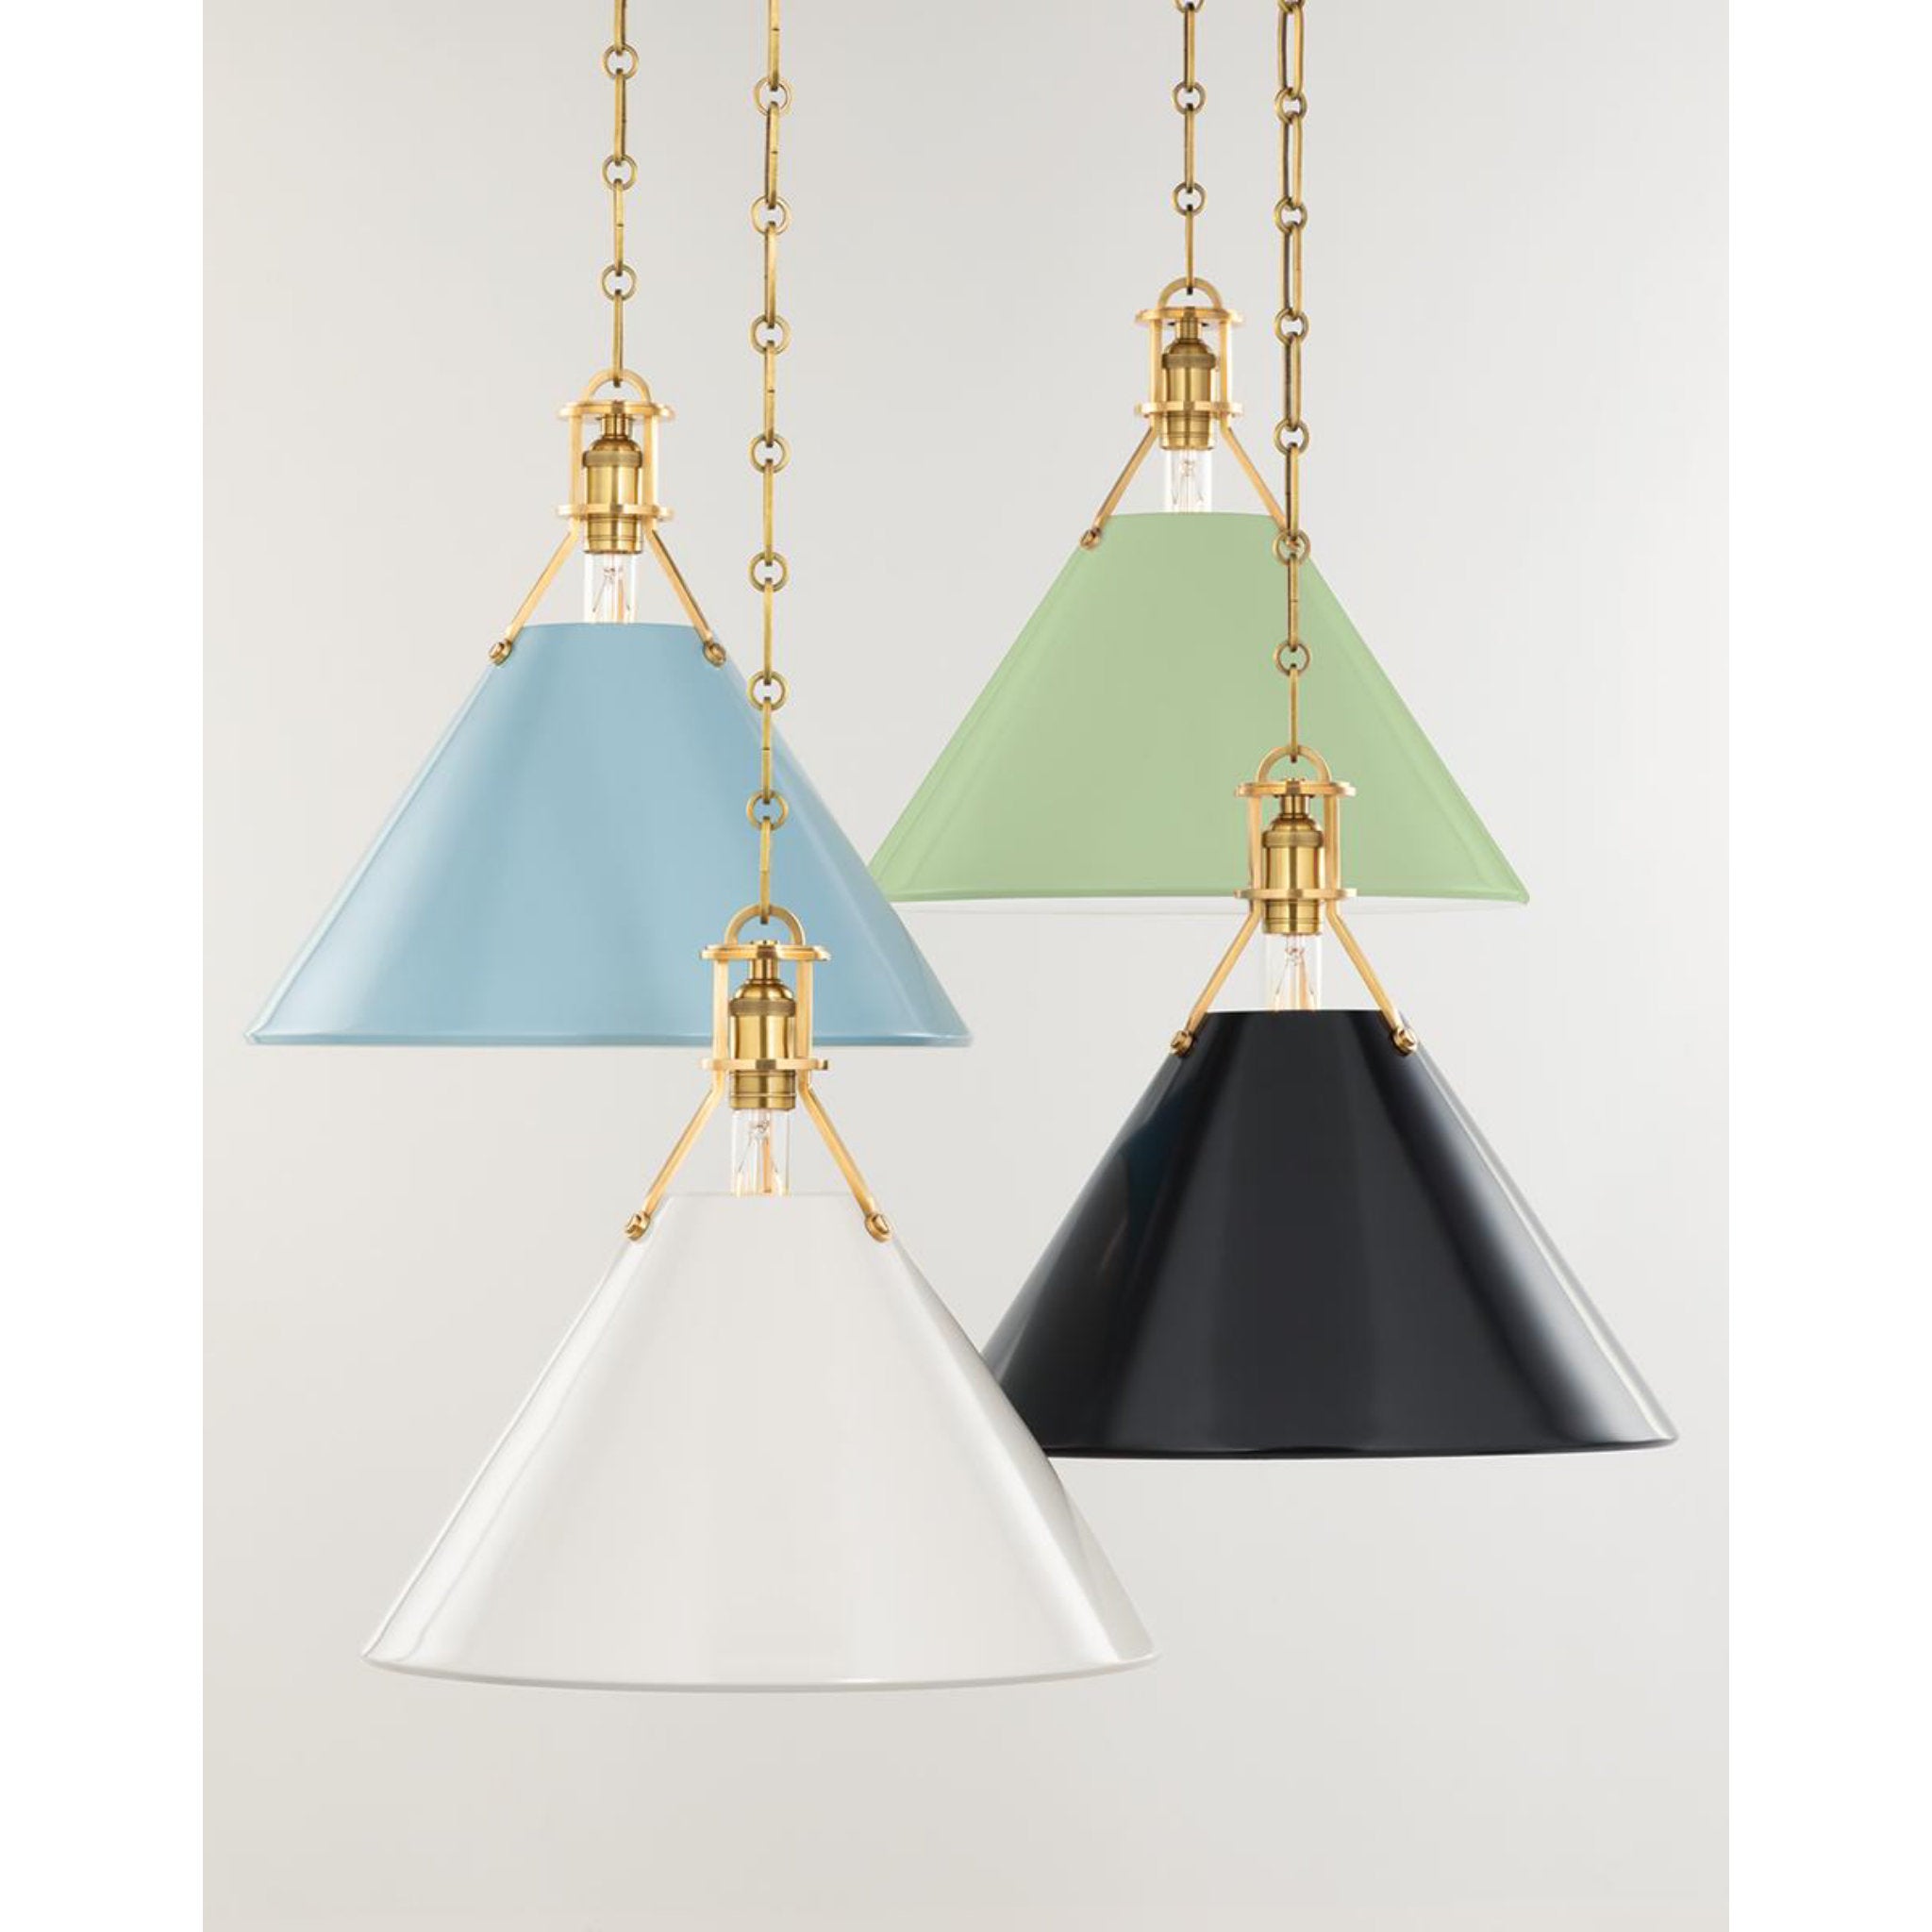 Painted No.2 1 Light Pendant in Polished Nickel/blue Bird by Mark D. Sikes